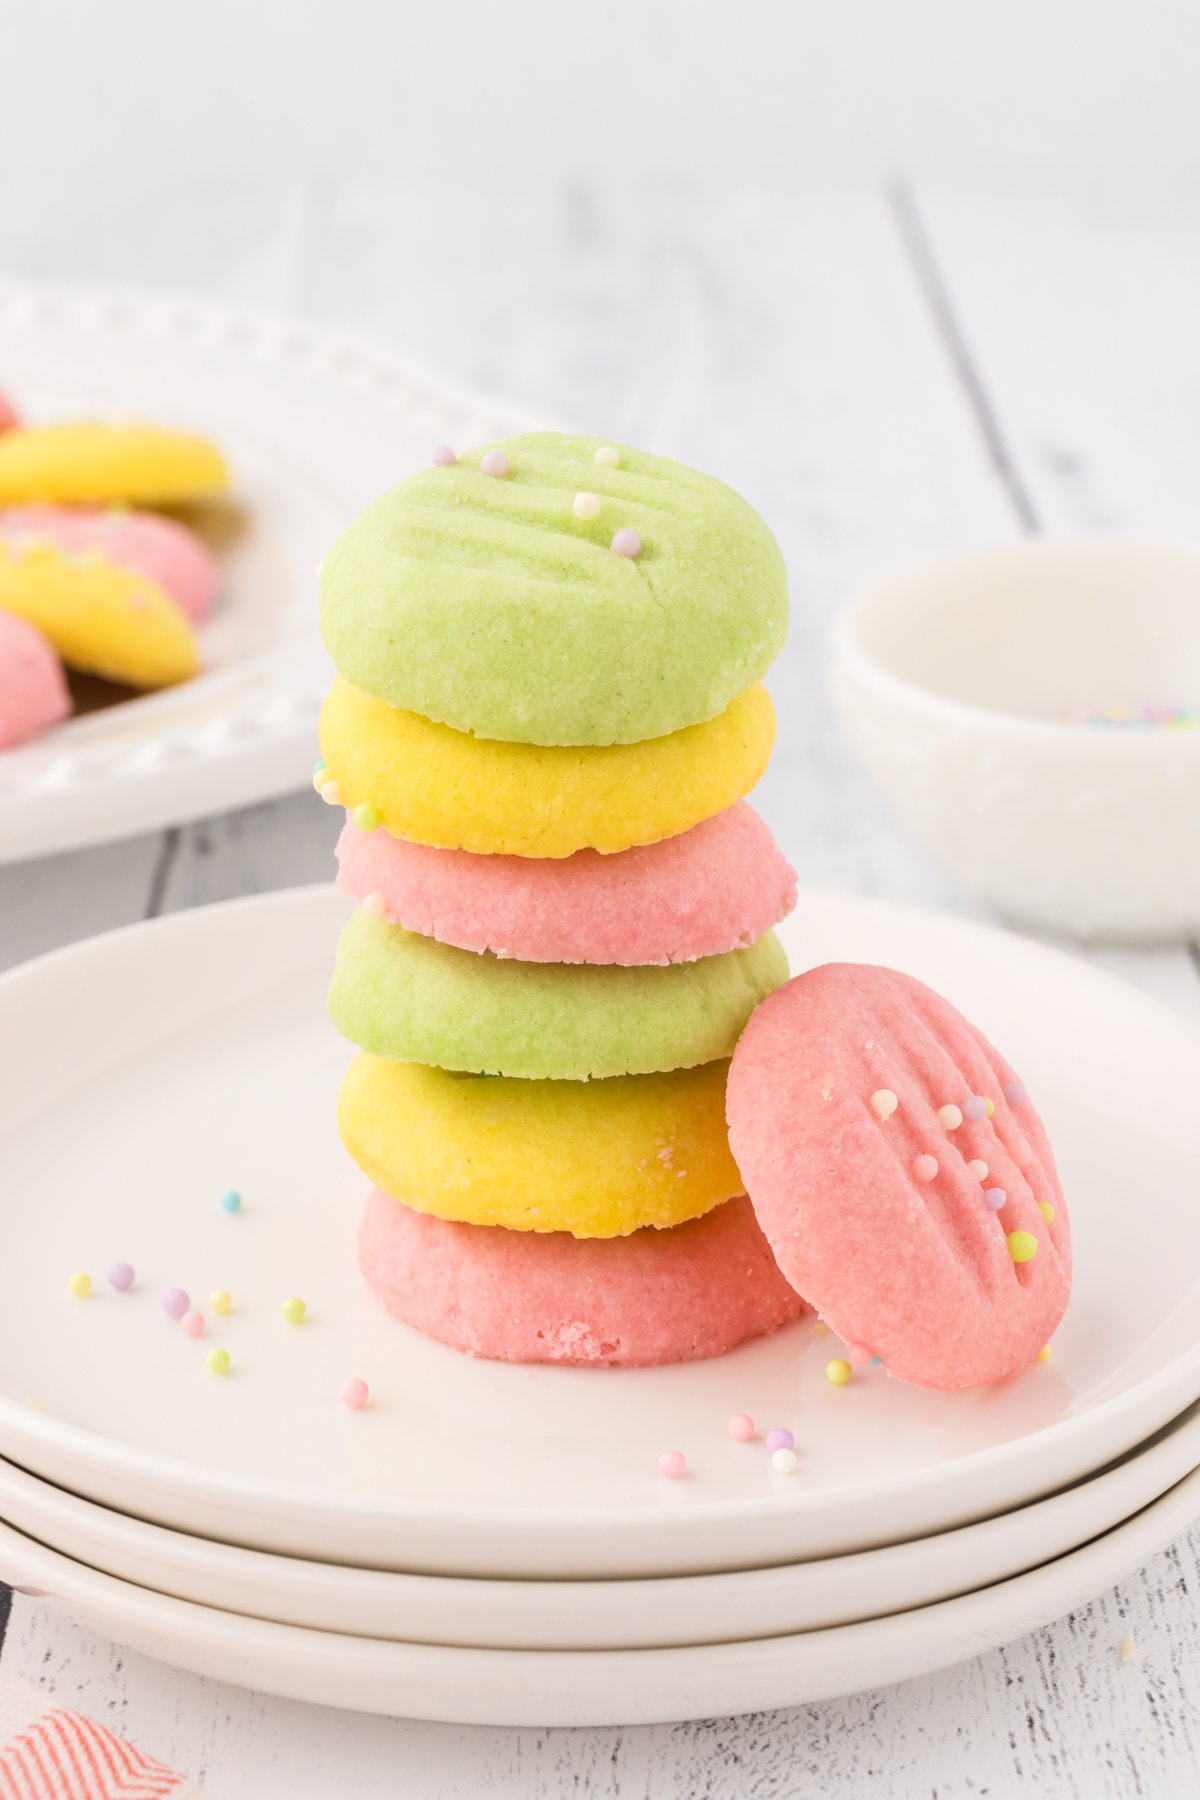 Pink, yellow, and green meltaway cookies stacked on each other on a plate.